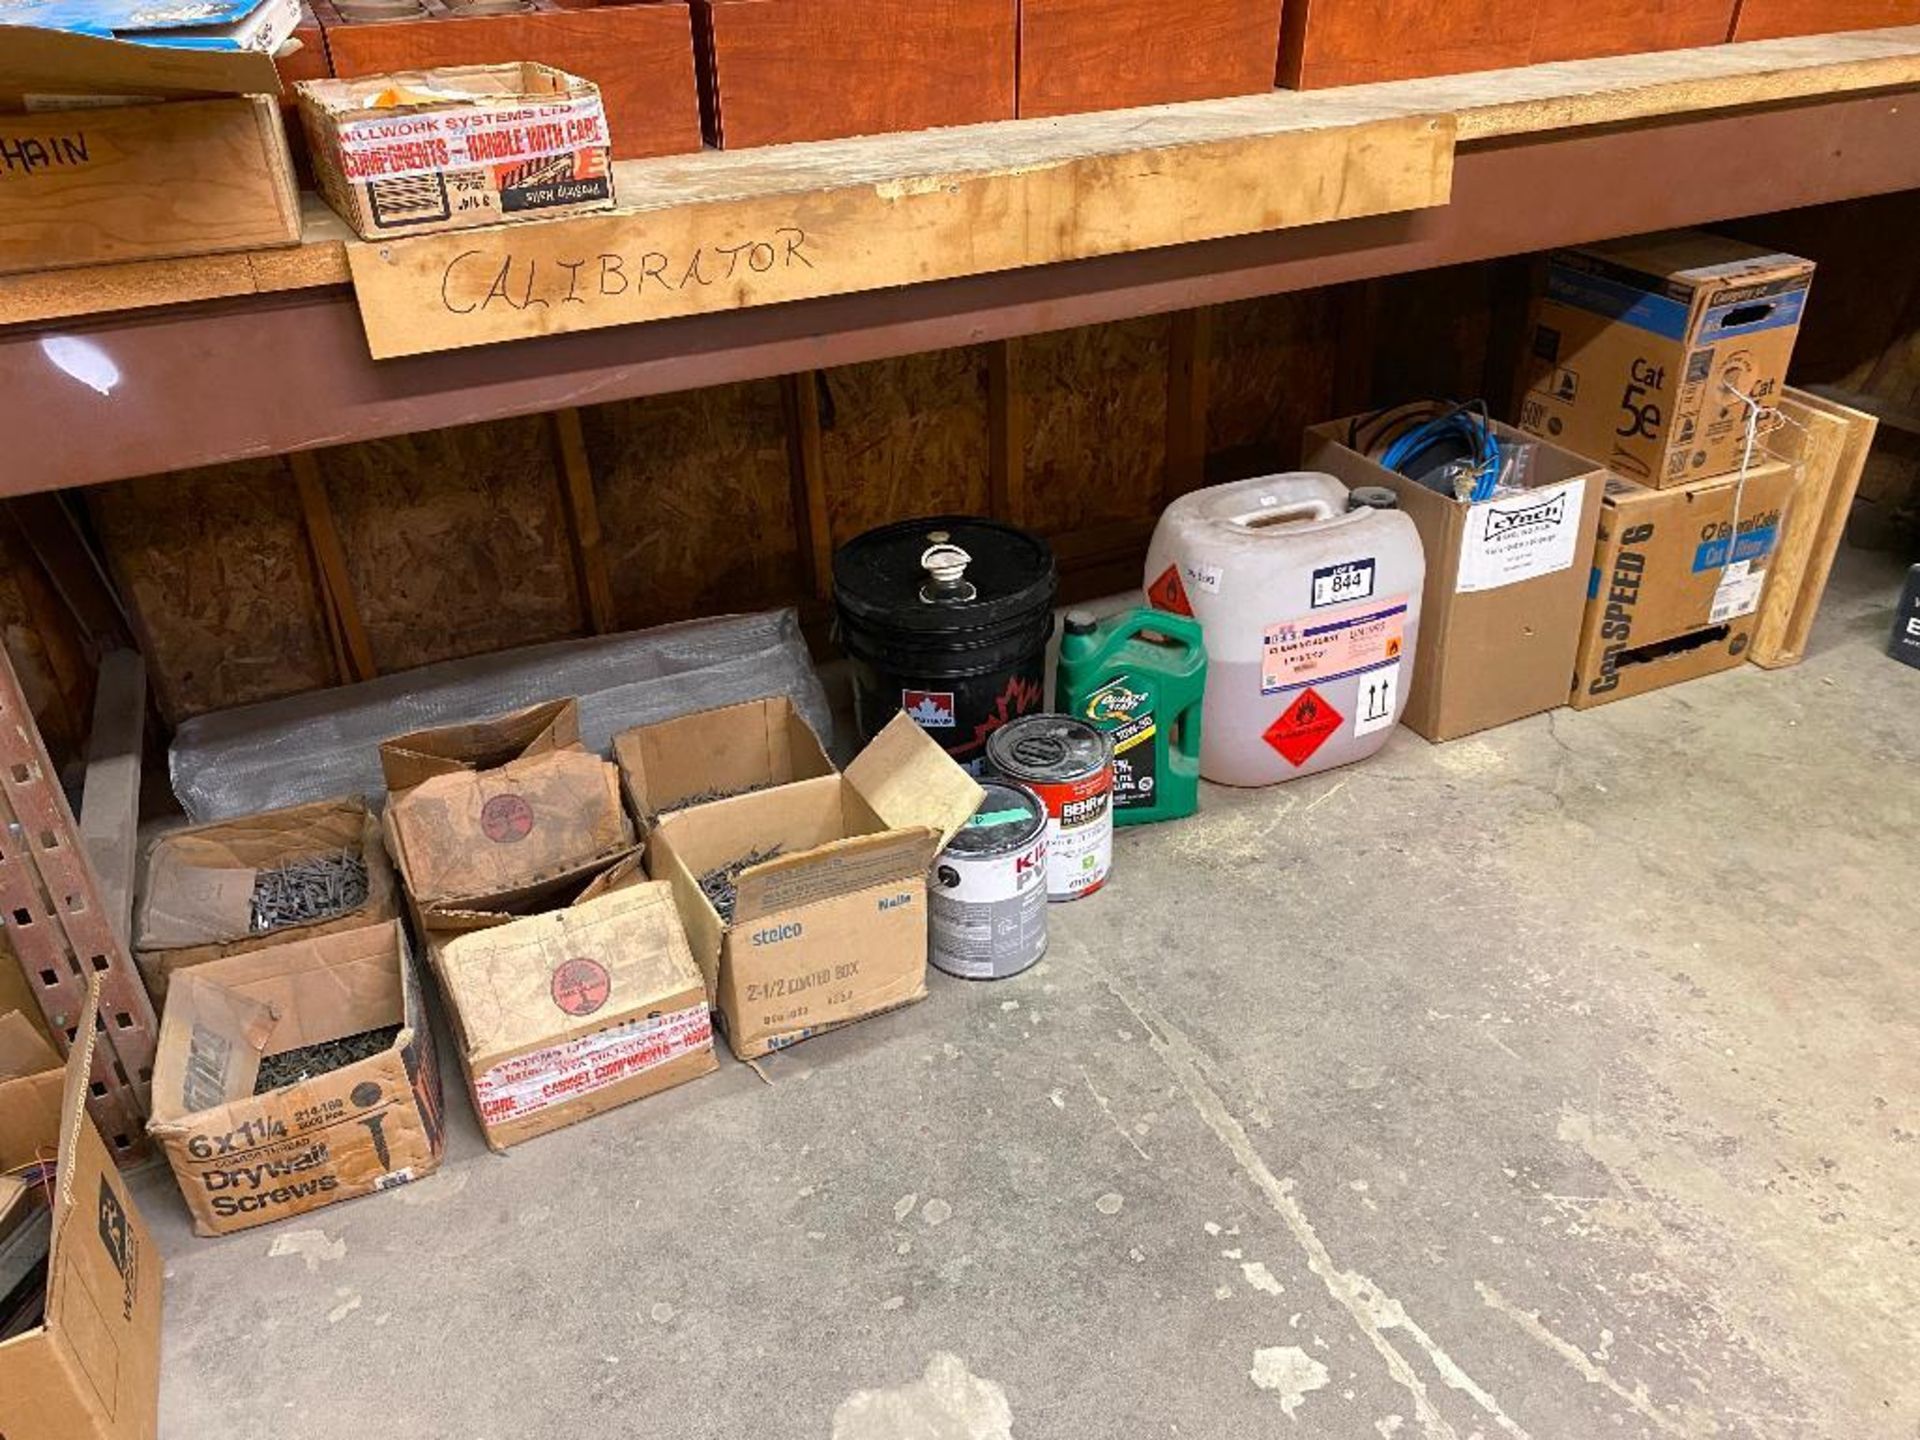 Lot of Asst. Nails, Cat5e Wire, Oils, Paint, Cleaning Agents, etc.